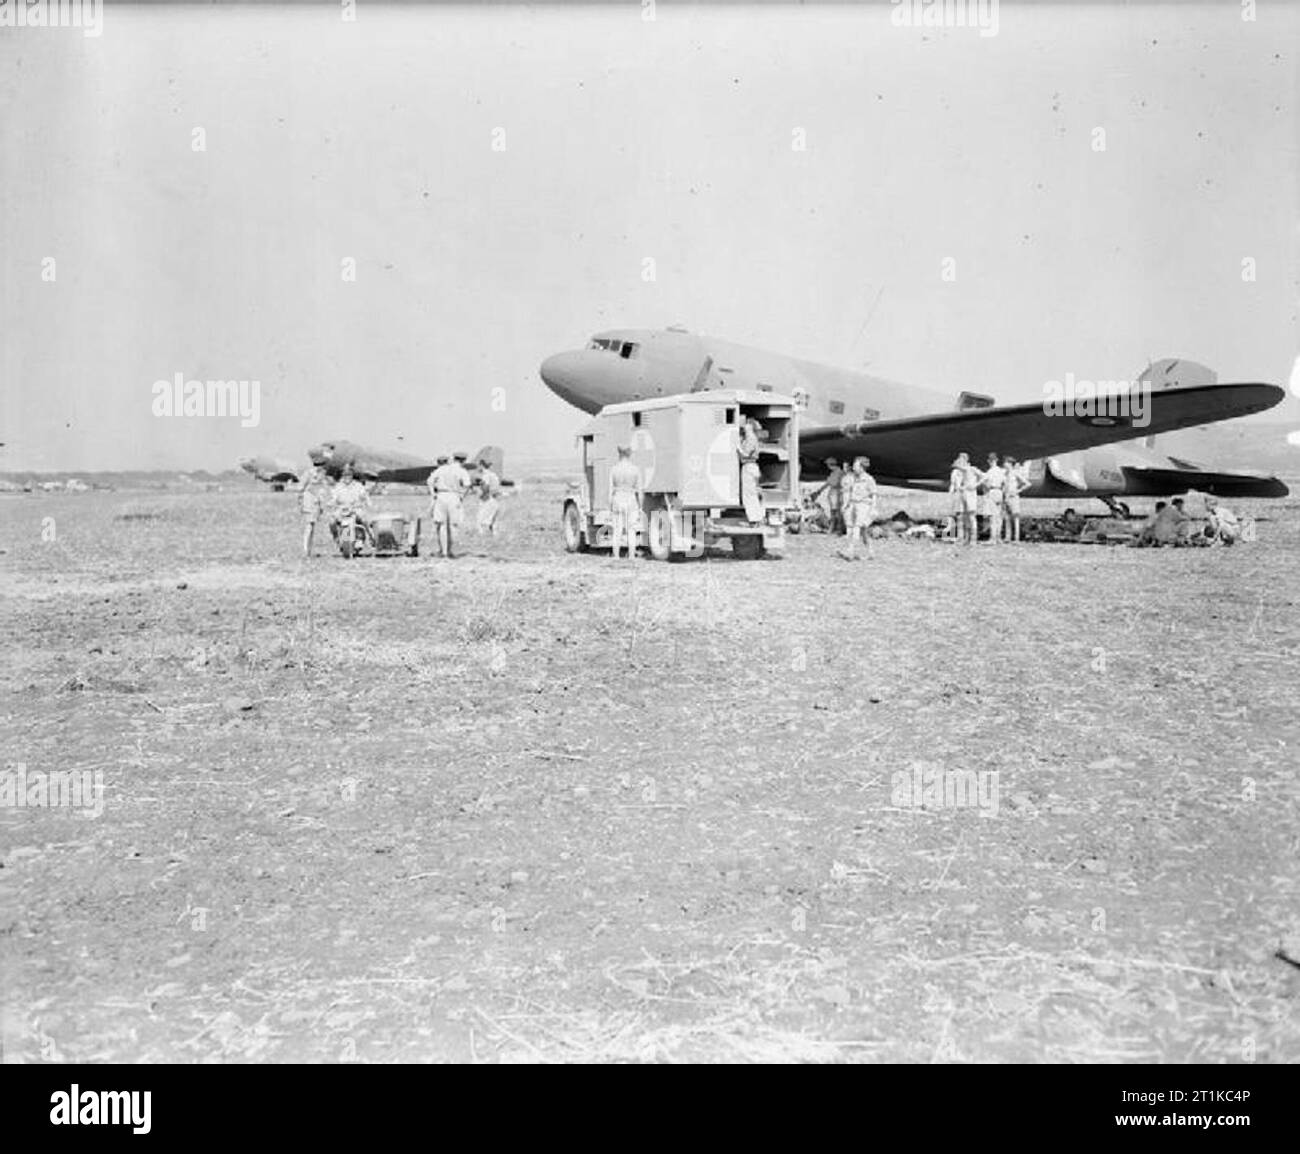 Royal Air Force- Italy, the Balkans and South-east Europe, 1942-1945. A British Army ambulance pulls up in front of a line of Douglas Dakota Mark IIIs at Catania, Sicily, FD986 Stock Photo